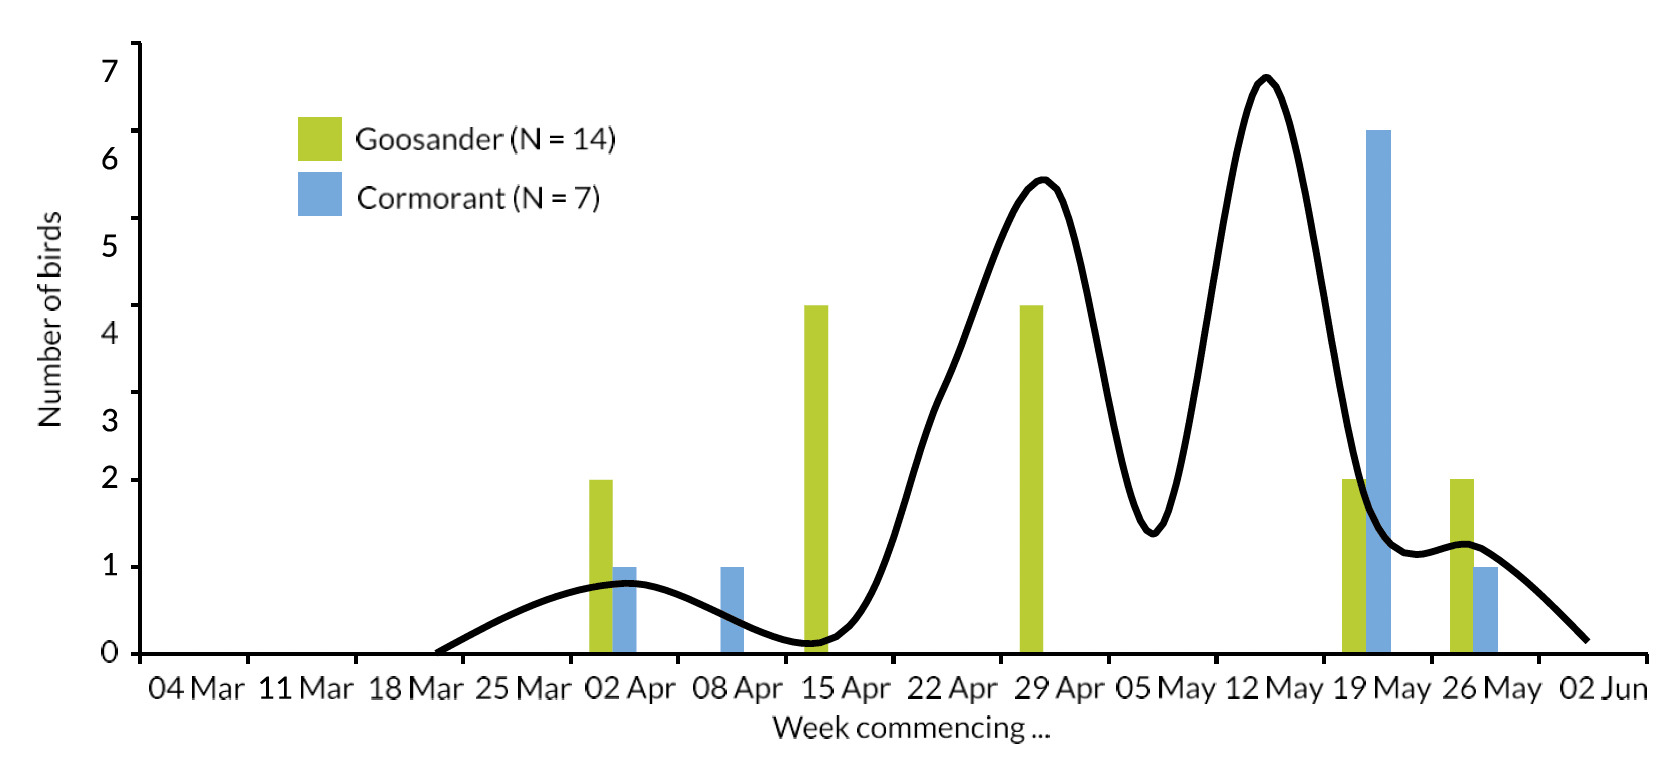 Bar chart of the number of Goosanders and Cormorants sampled each week on the RiverTweed during the ‘smolt run period’ of the present study. A superimposed curve indicates the general temporal pattern of the smolt run with peaks in the weeks commencing 29 April and 12 May, based on catches from the Gala Water smolt trap.